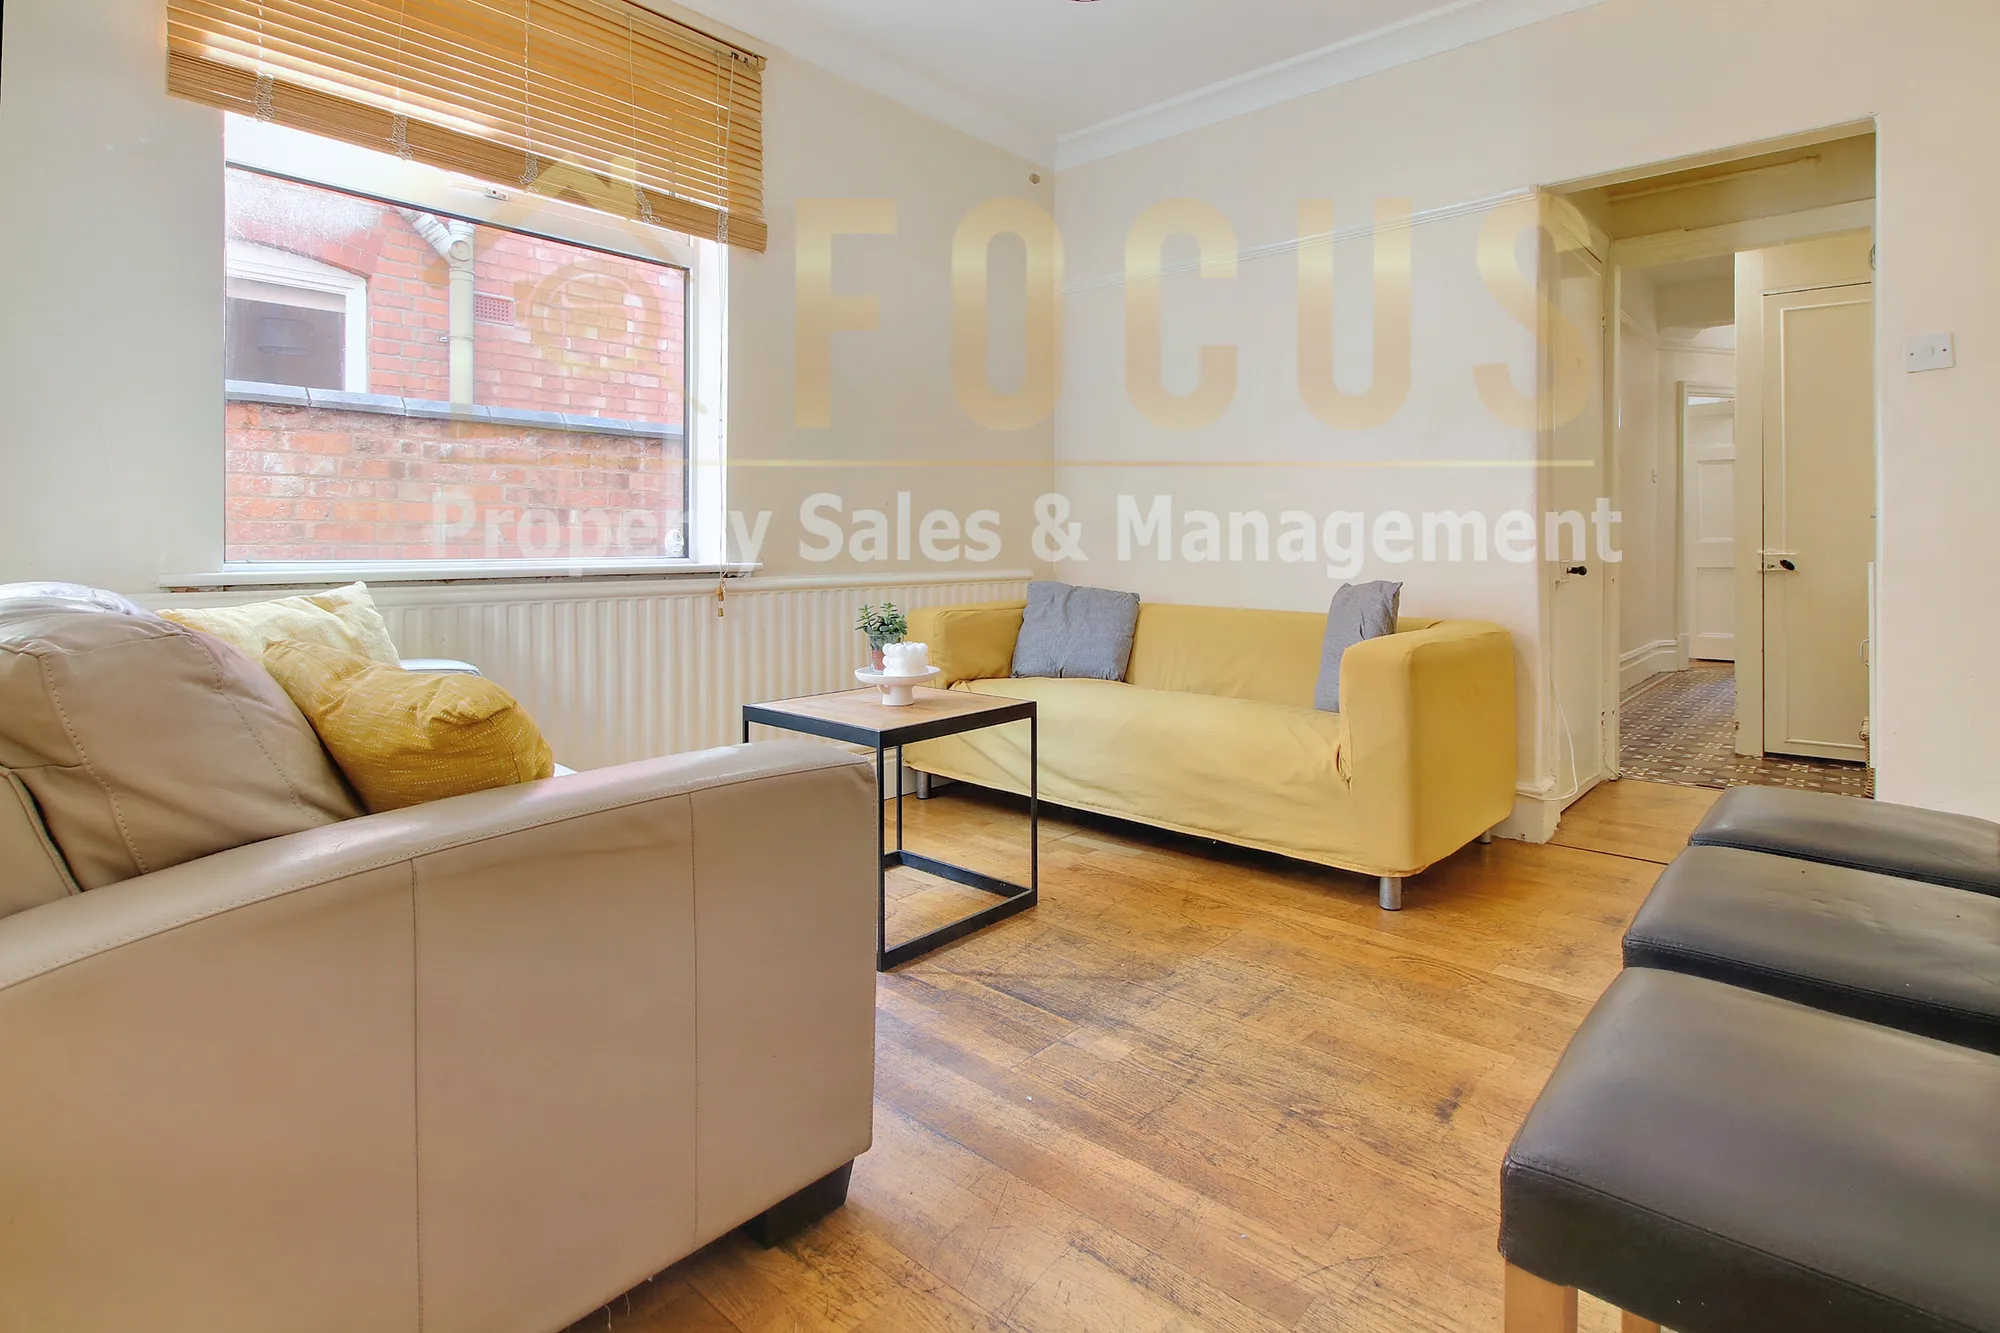 5 bed mid-terraced house to rent in Lorne Road, Leicester - Property Image 1